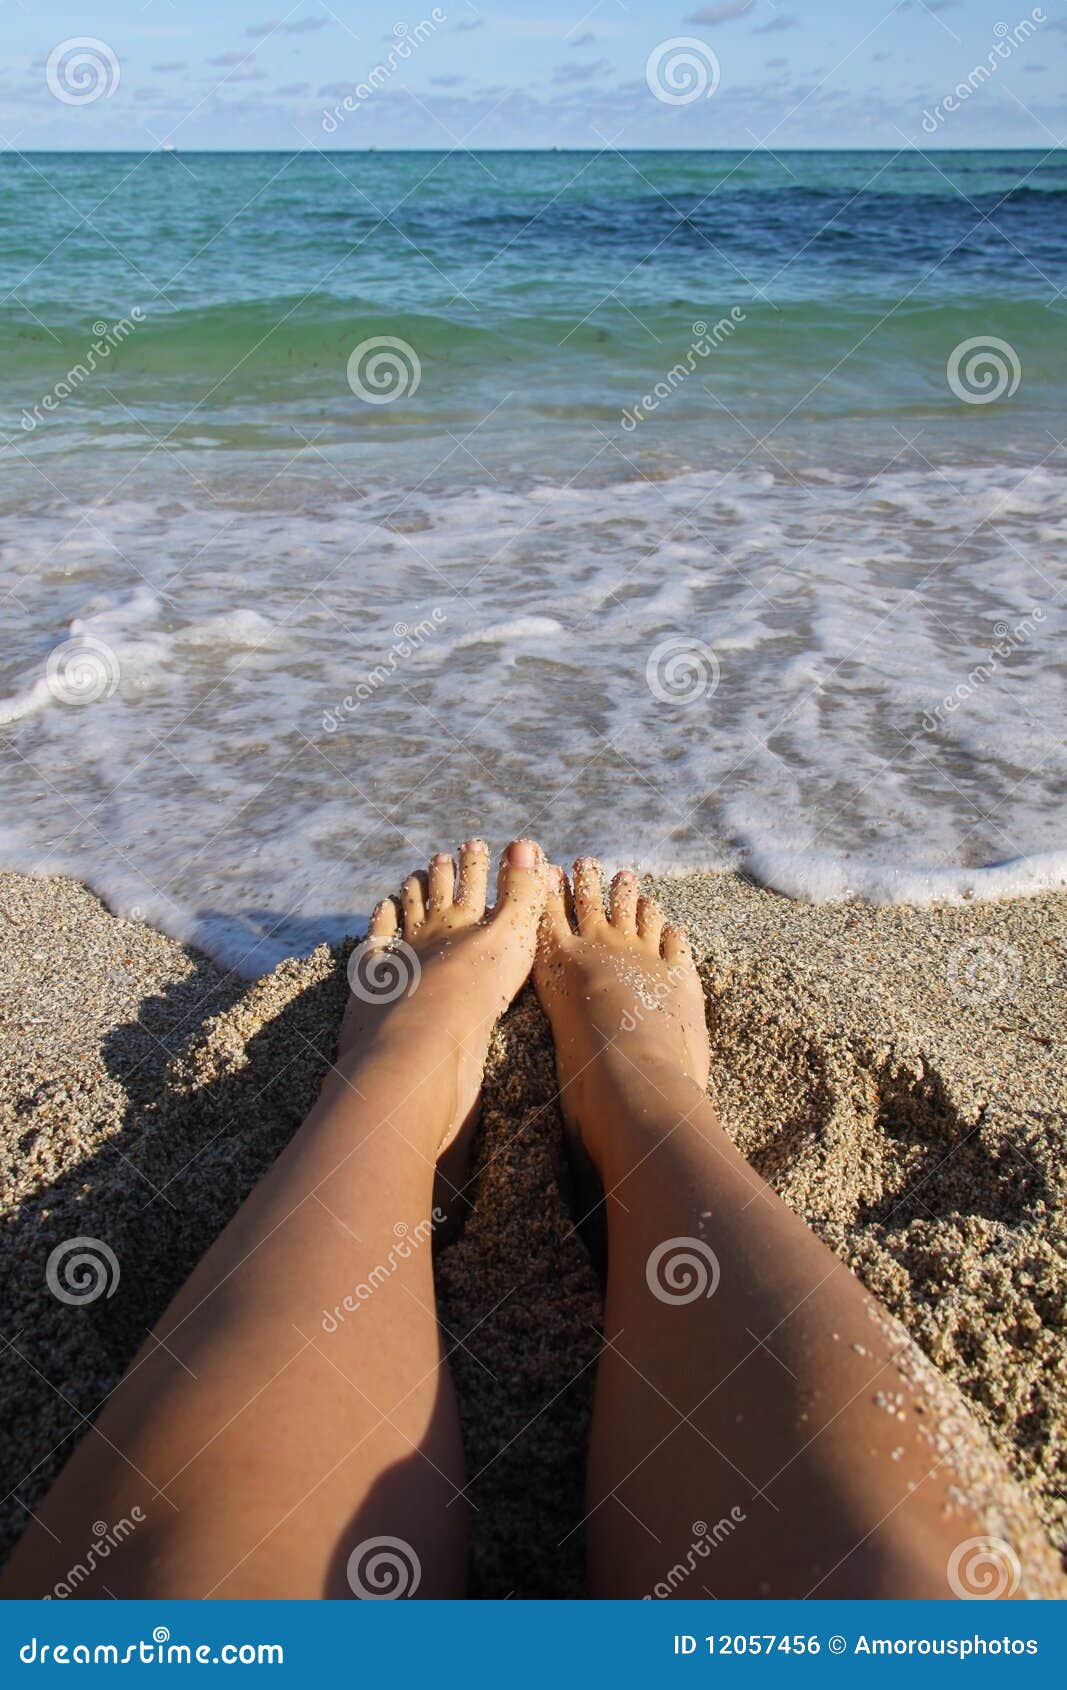 Feet in Florida Sands stock photo. Image of legs, waves - 12057456